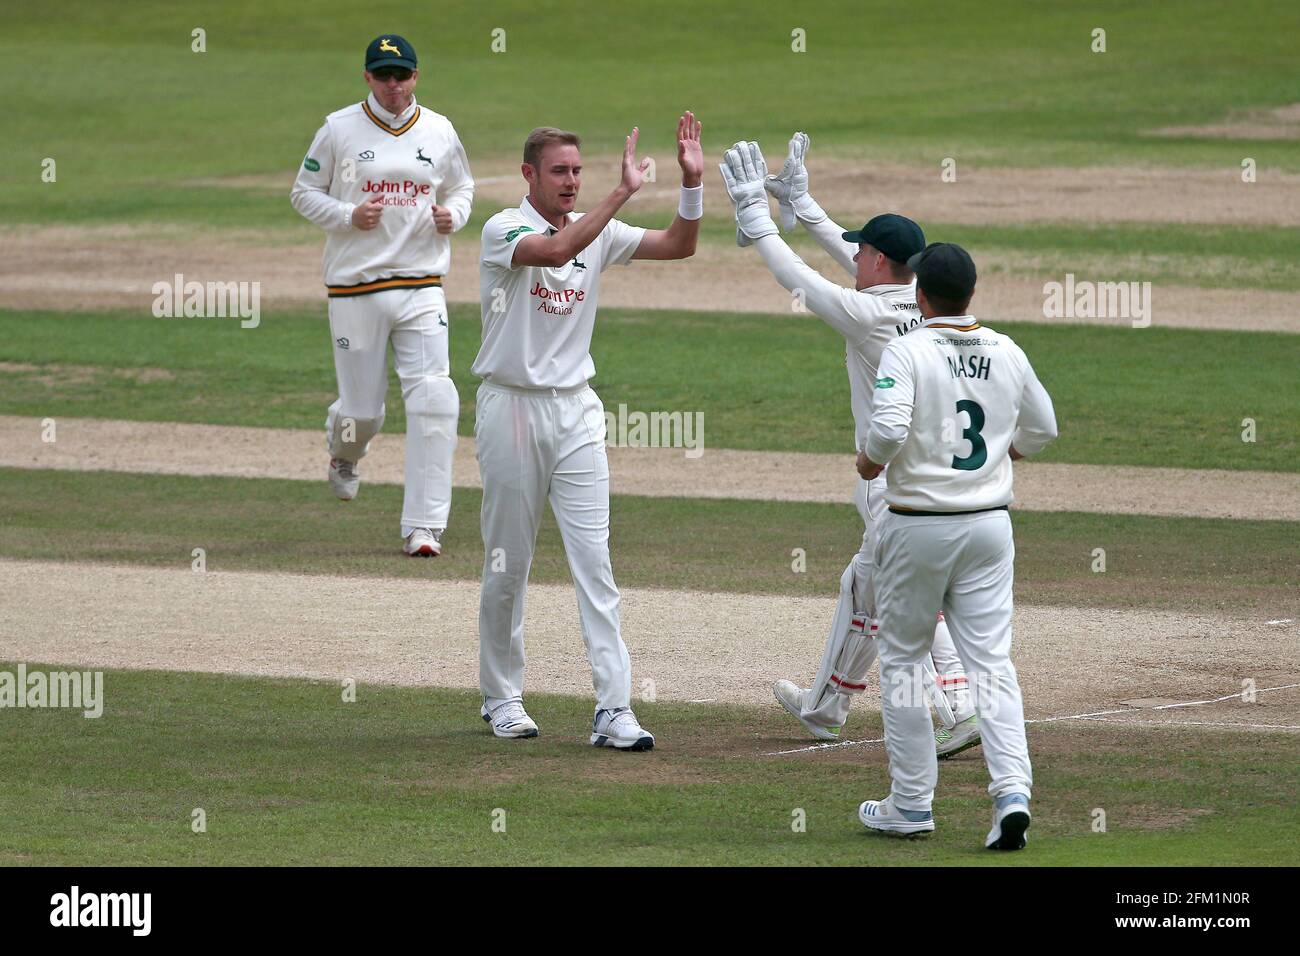 Stuart Broad of Nottinghamshire celebrates with his team mates after taking the wicket of Nick Browne during Nottinghamshire CCC vs Essex CCC, Specsav Stock Photo